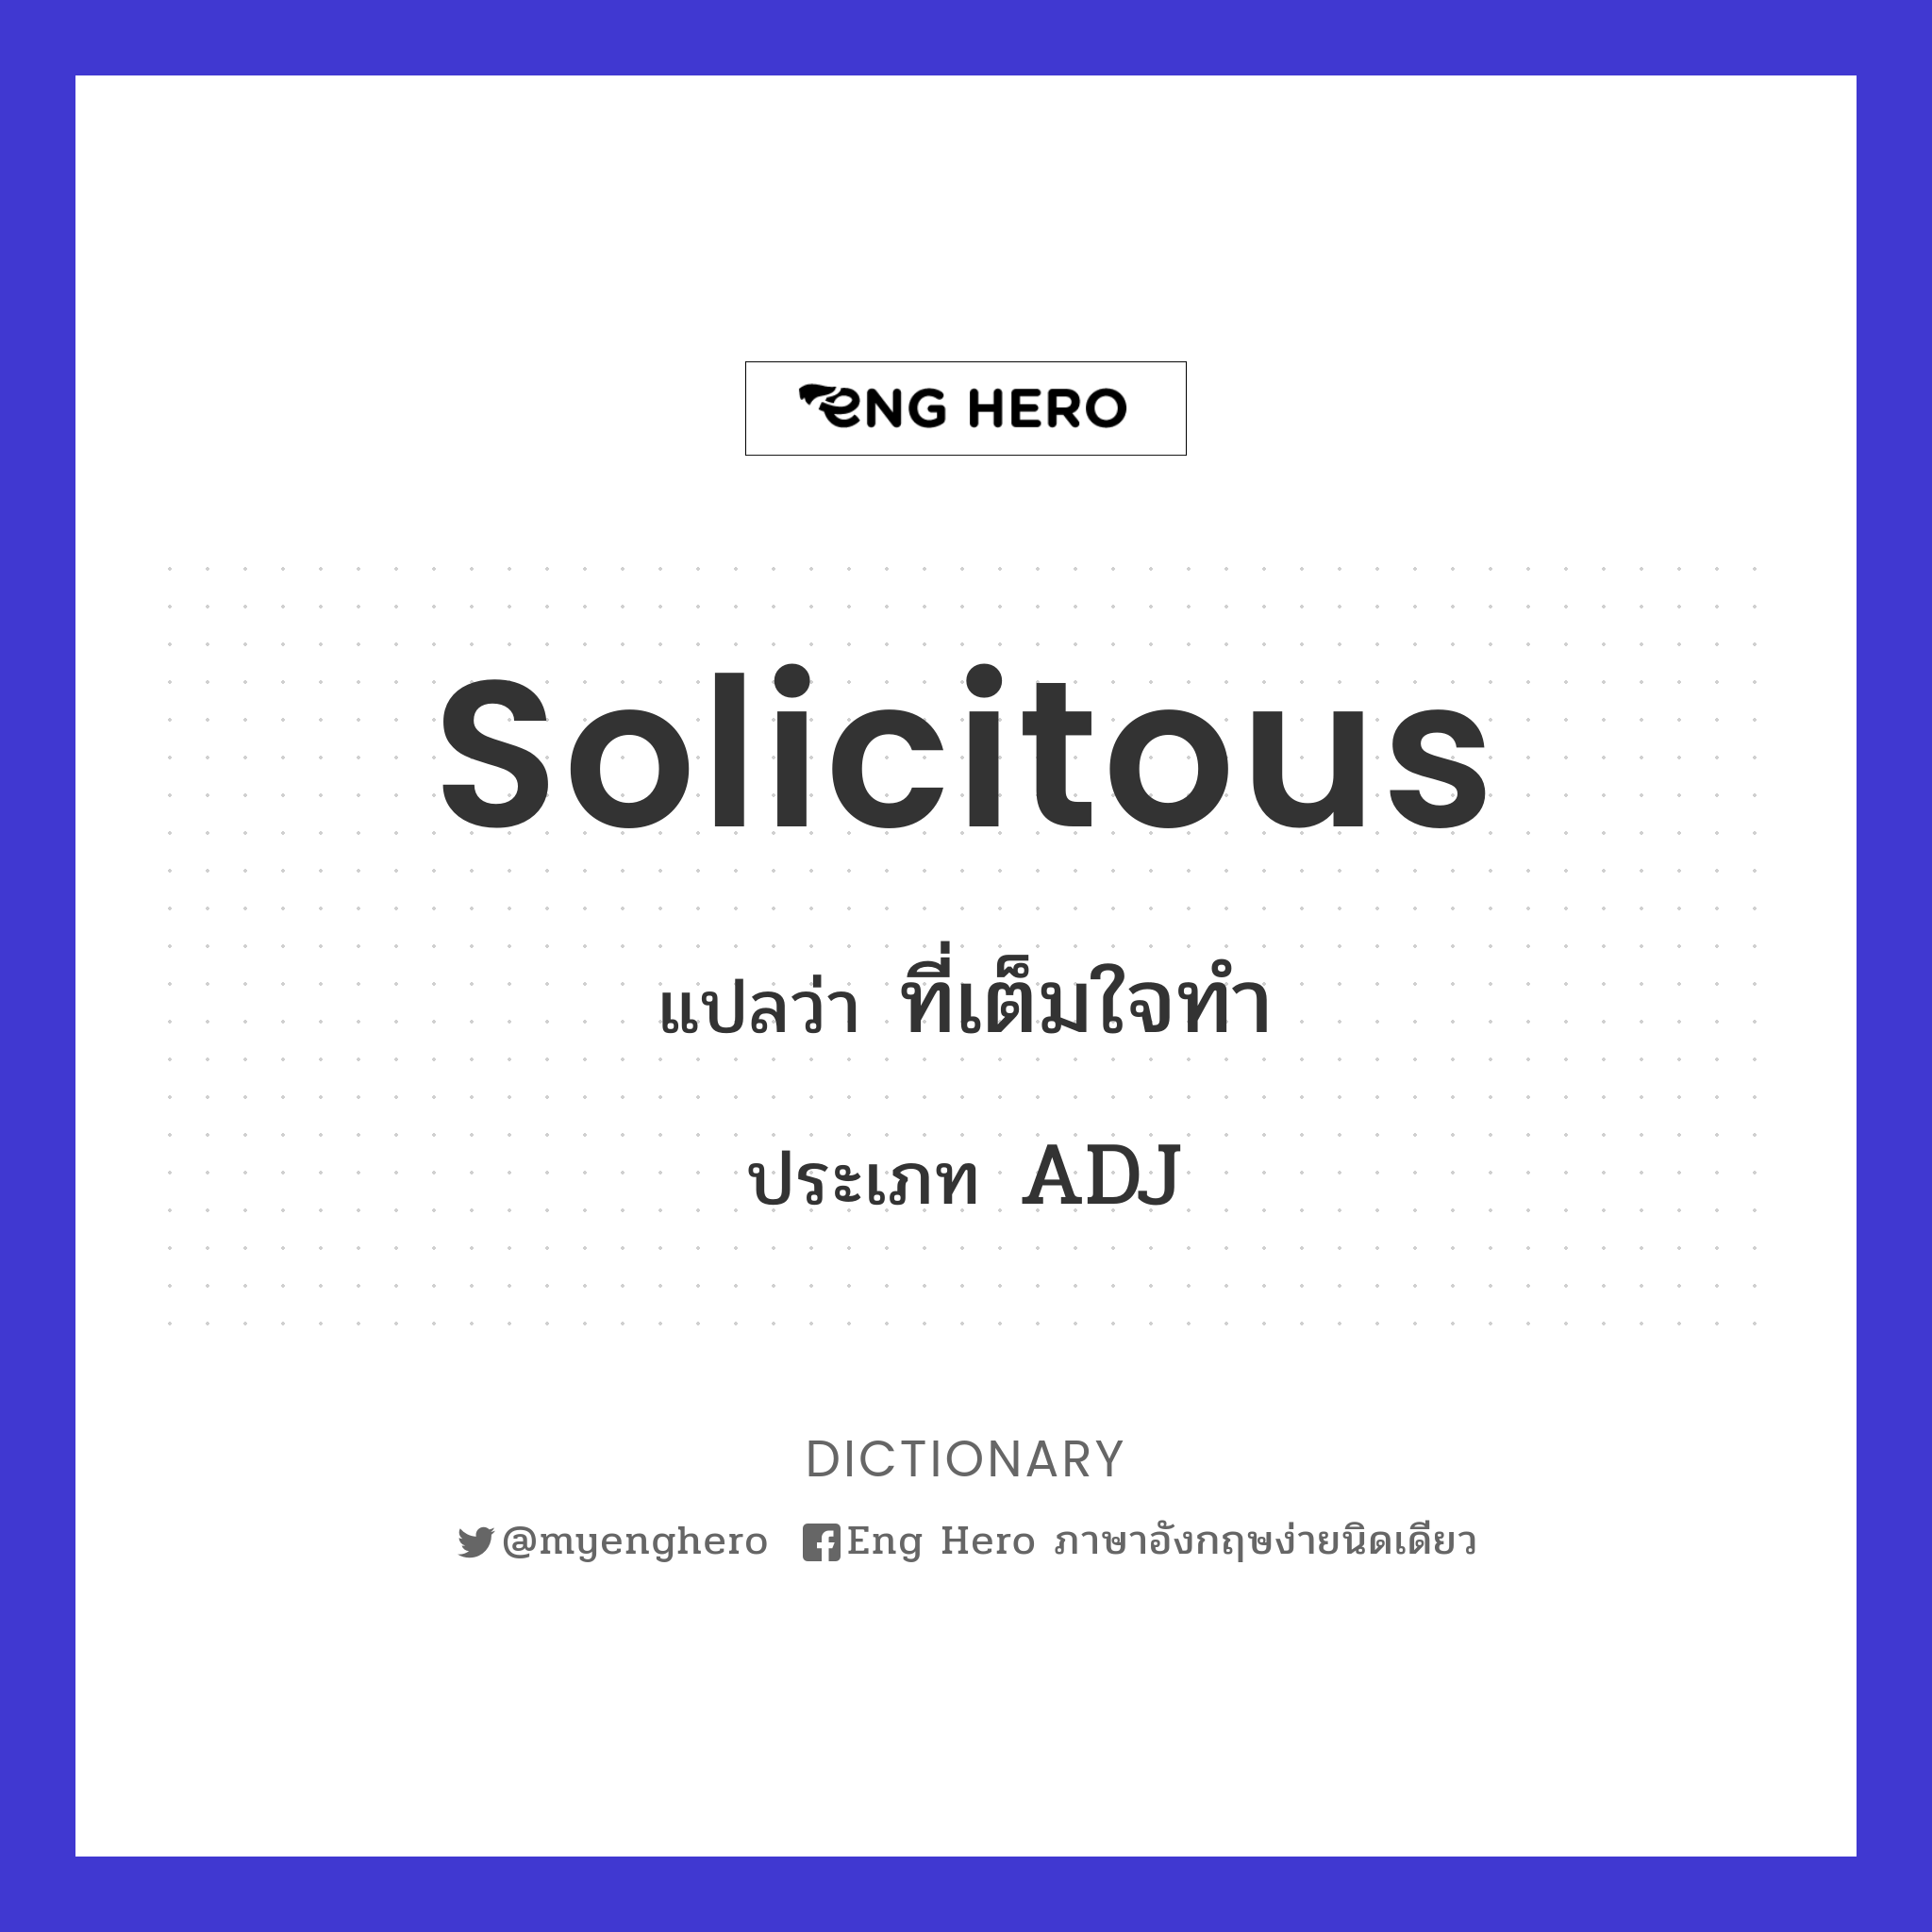 solicitous